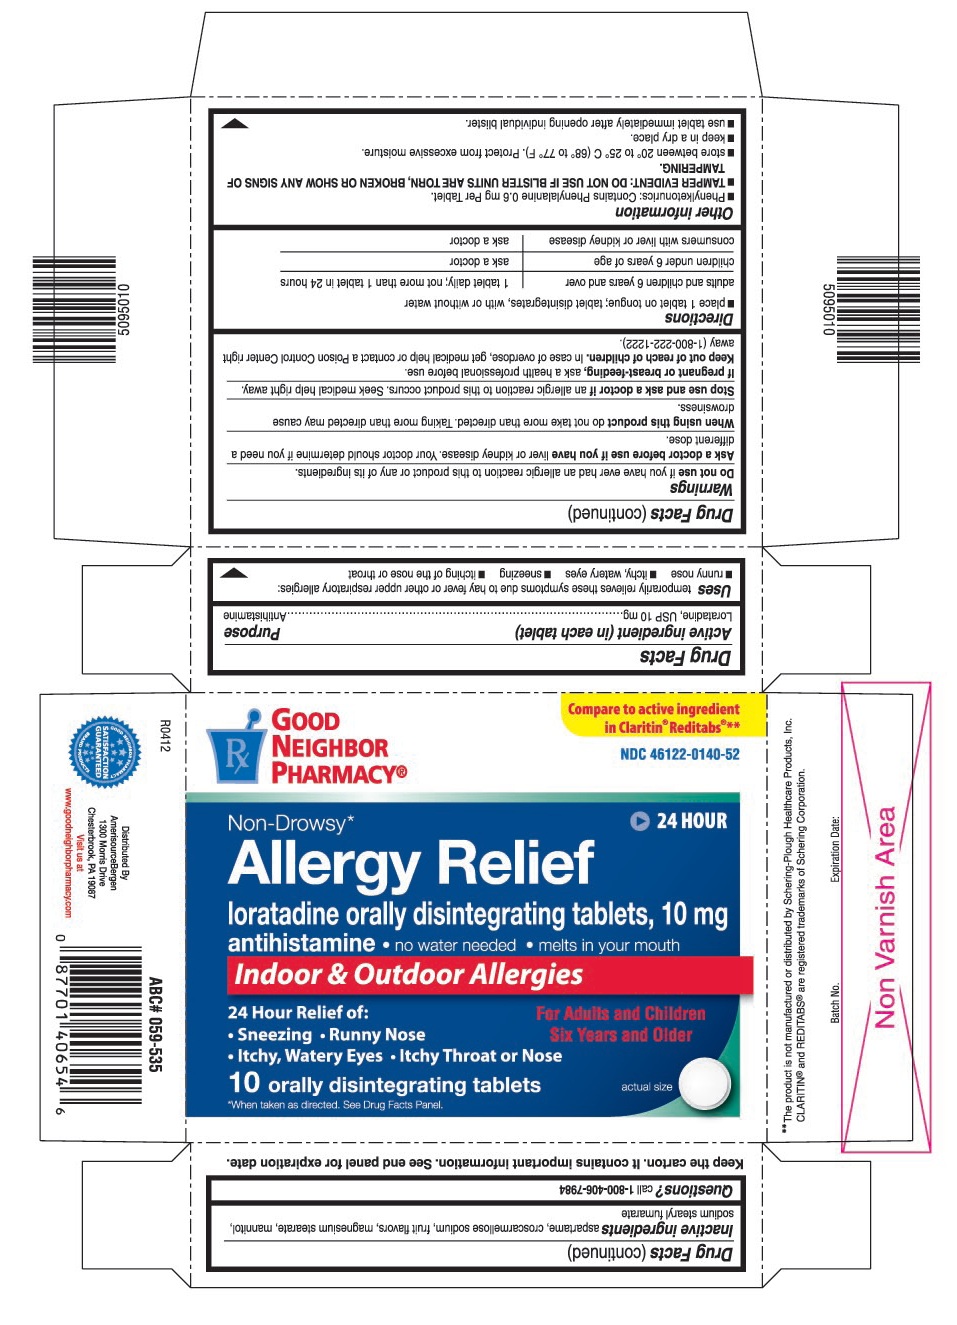 This is the 10 count blister carton label for Good Neighbor Pharmacy Loratadine ODT, 10 mg (Claritin like - for kids).